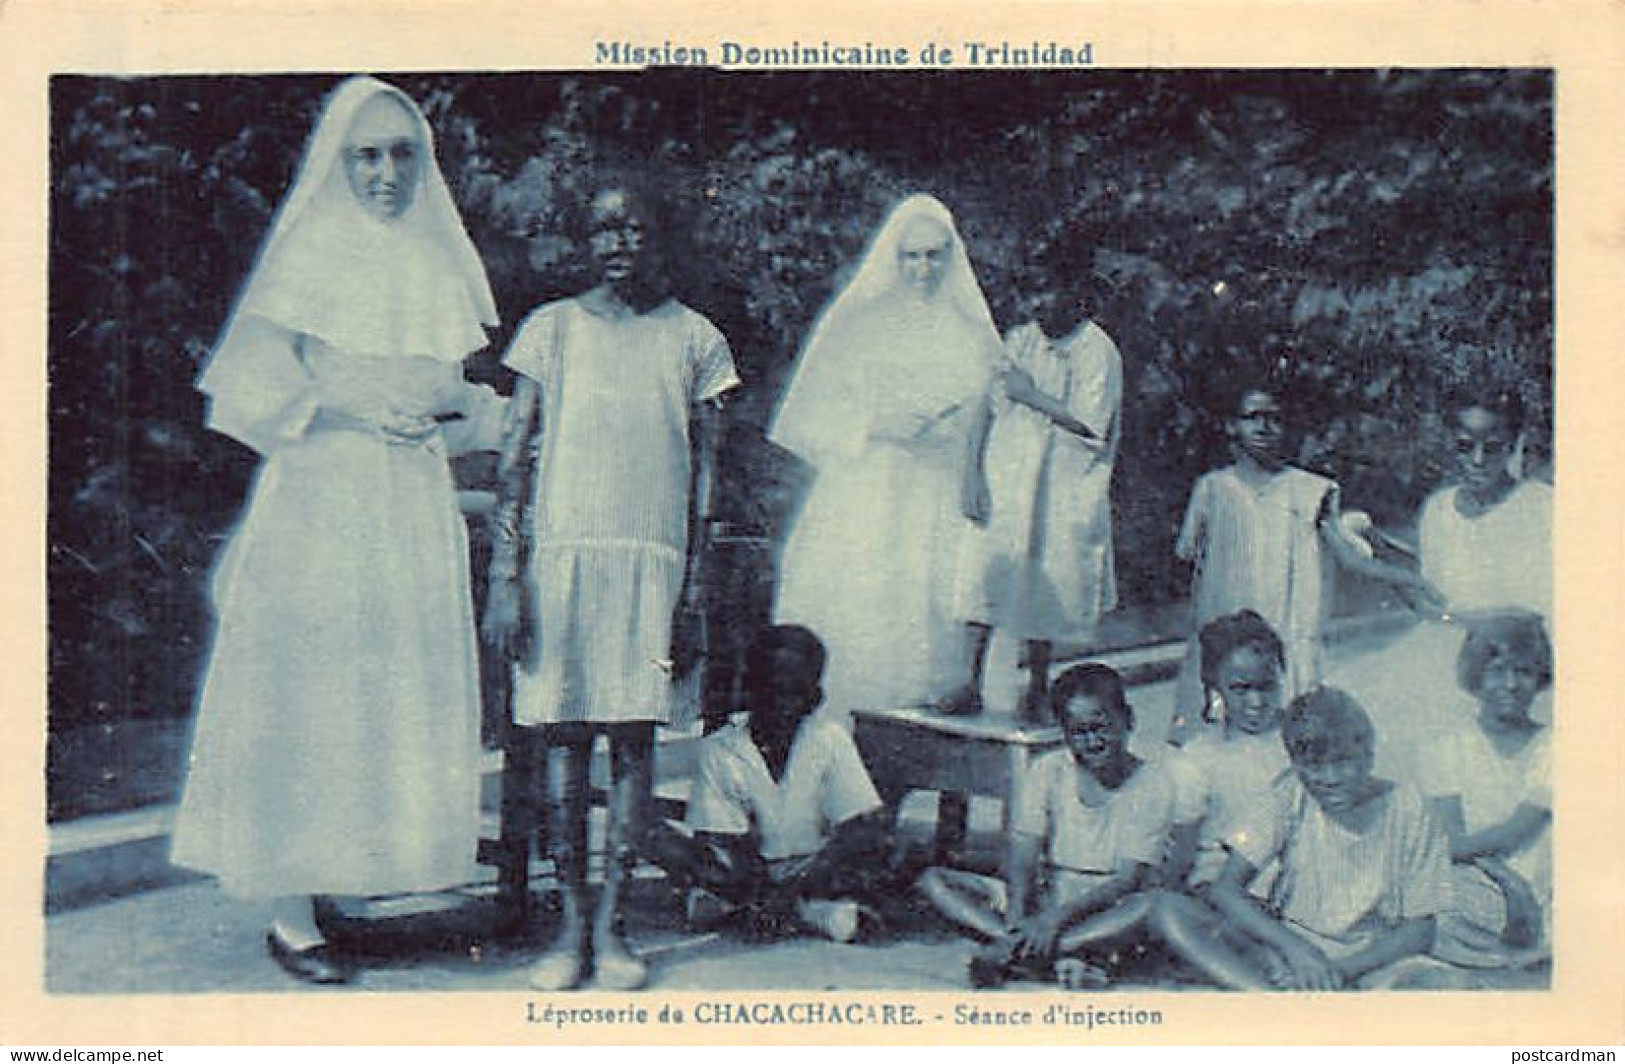 Trinidad - CHACACHACARE Leper Colony - The Injection - Publ. Dominican Mission  - Trinidad